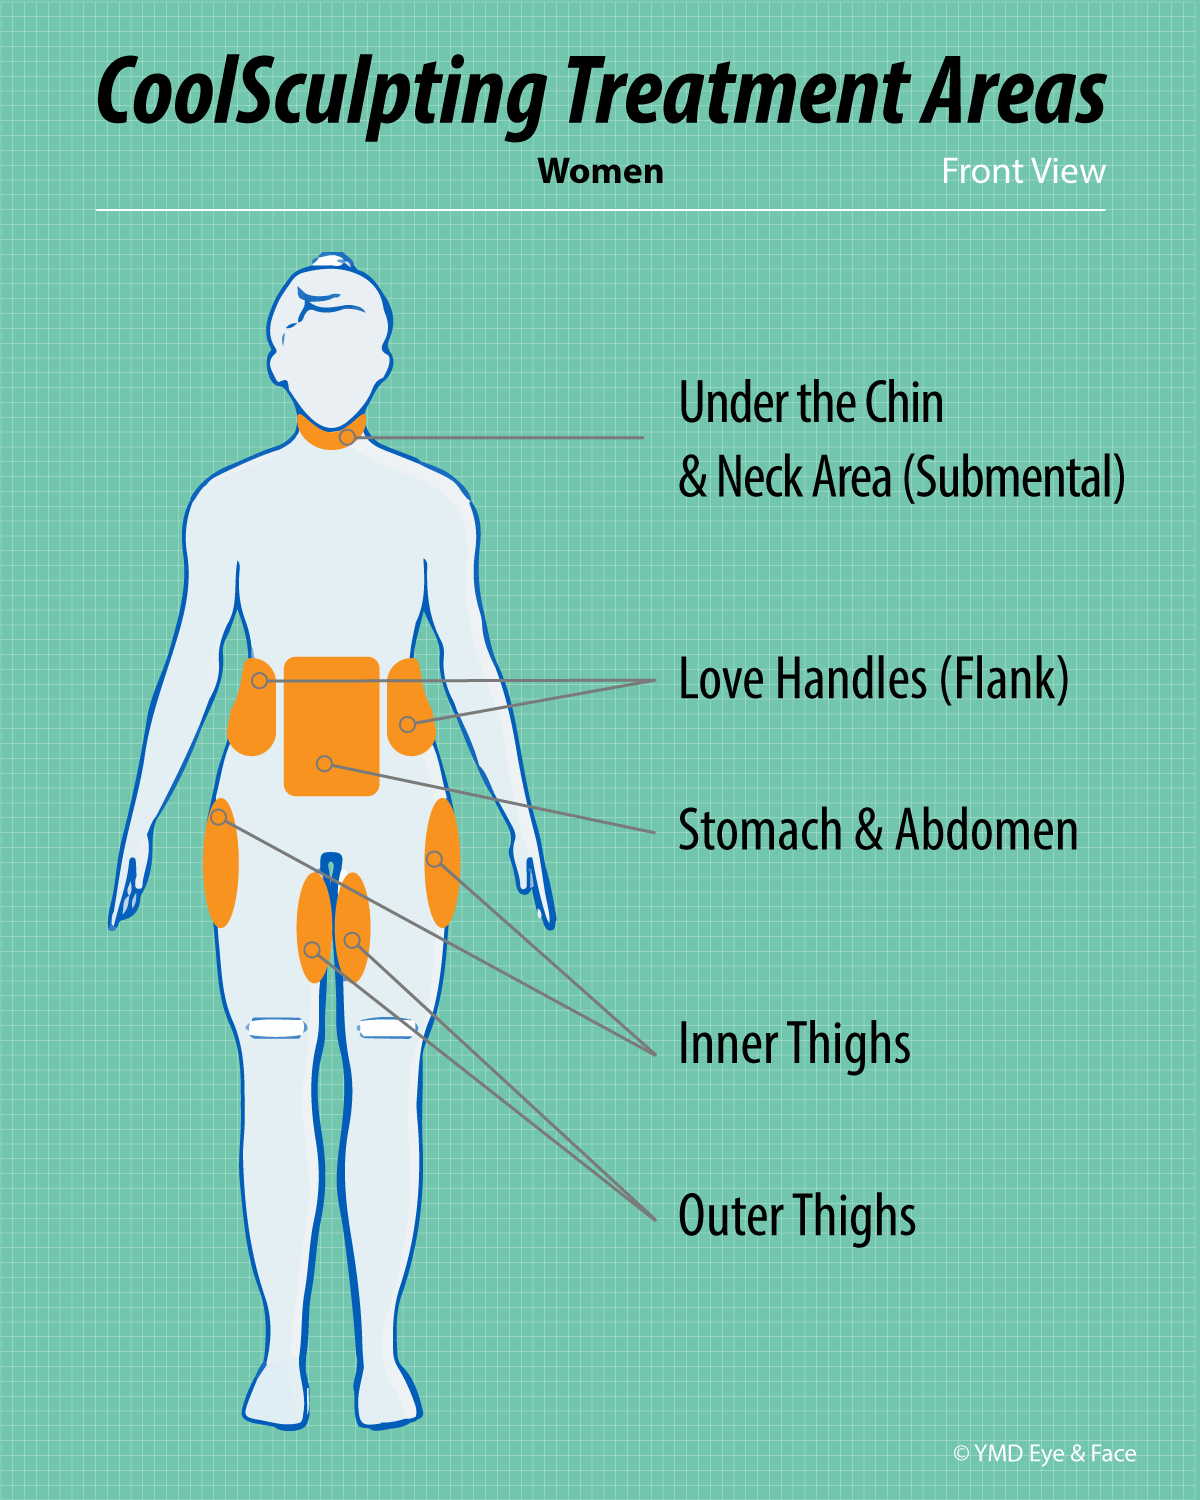 CoolSculpting graphic highlighting possible treatment areas for women (front view): under chin and neck, love handles (flanks), stomach and abdomen, inner thighs and outer thighs